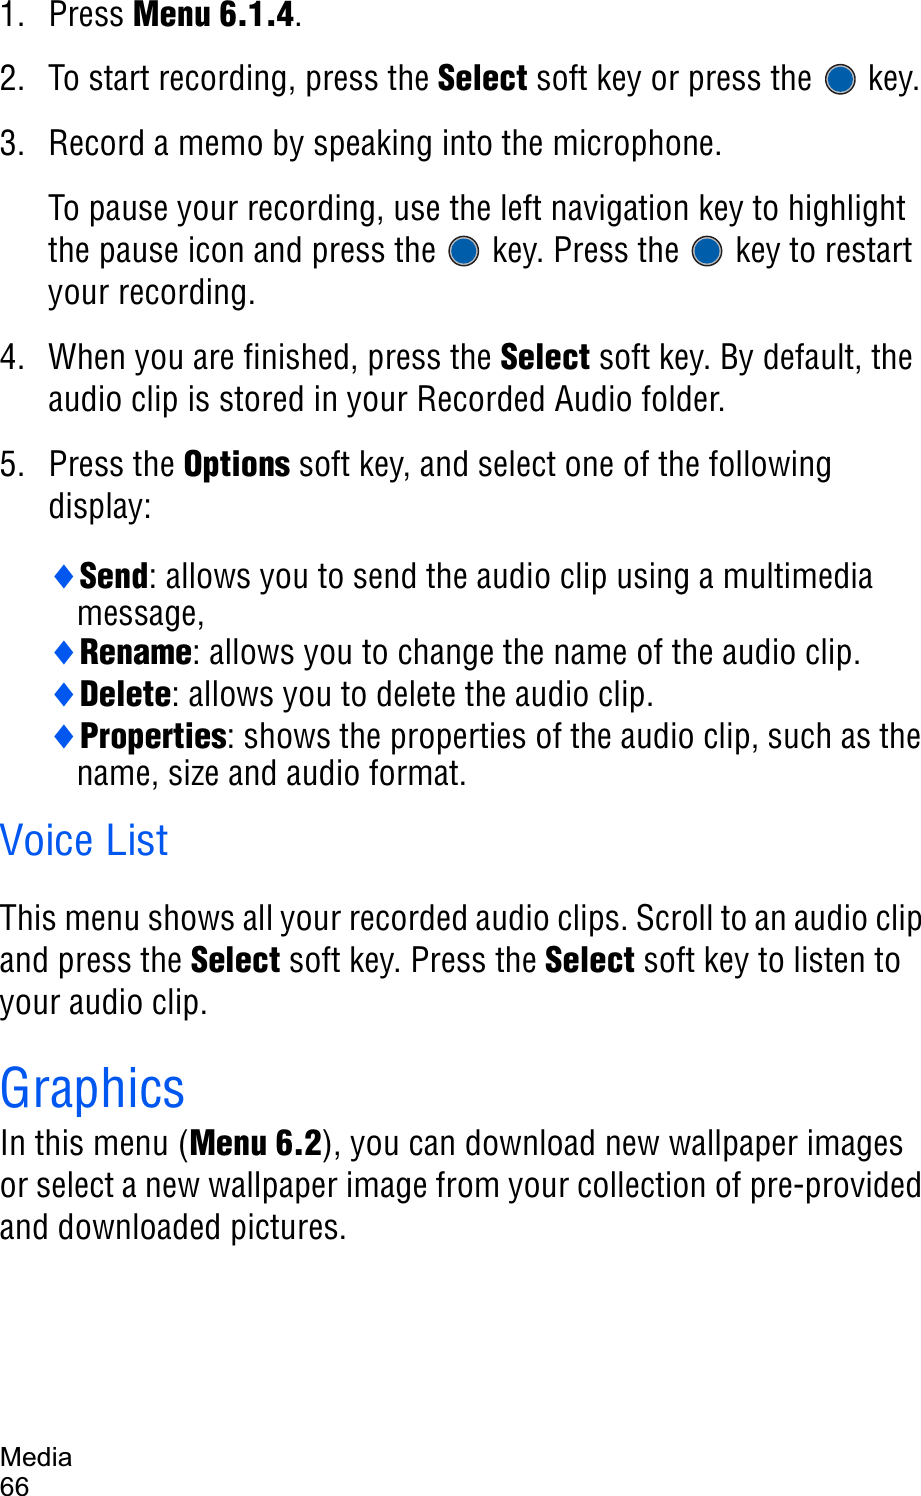 Media661. Press Menu 6.1.4.2. To start recording, press the Select soft key or press the   key. 3. Record a memo by speaking into the microphone. To pause your recording, use the left navigation key to highlight the pause icon and press the   key. Press the   key to restart your recording.4. When you are finished, press the Select soft key. By default, the audio clip is stored in your Recorded Audio folder.5. Press the Options soft key, and select one of the following display:iSend: allows you to send the audio clip using a multimedia message,iRename: allows you to change the name of the audio clip.iDelete: allows you to delete the audio clip.iProperties: shows the properties of the audio clip, such as the name, size and audio format.Voice ListThis menu shows all your recorded audio clips. Scroll to an audio clip and press the Select soft key. Press the Select soft key to listen to your audio clip.GraphicsIn this menu (Menu 6.2), you can download new wallpaper images or select a new wallpaper image from your collection of pre-provided and downloaded pictures.